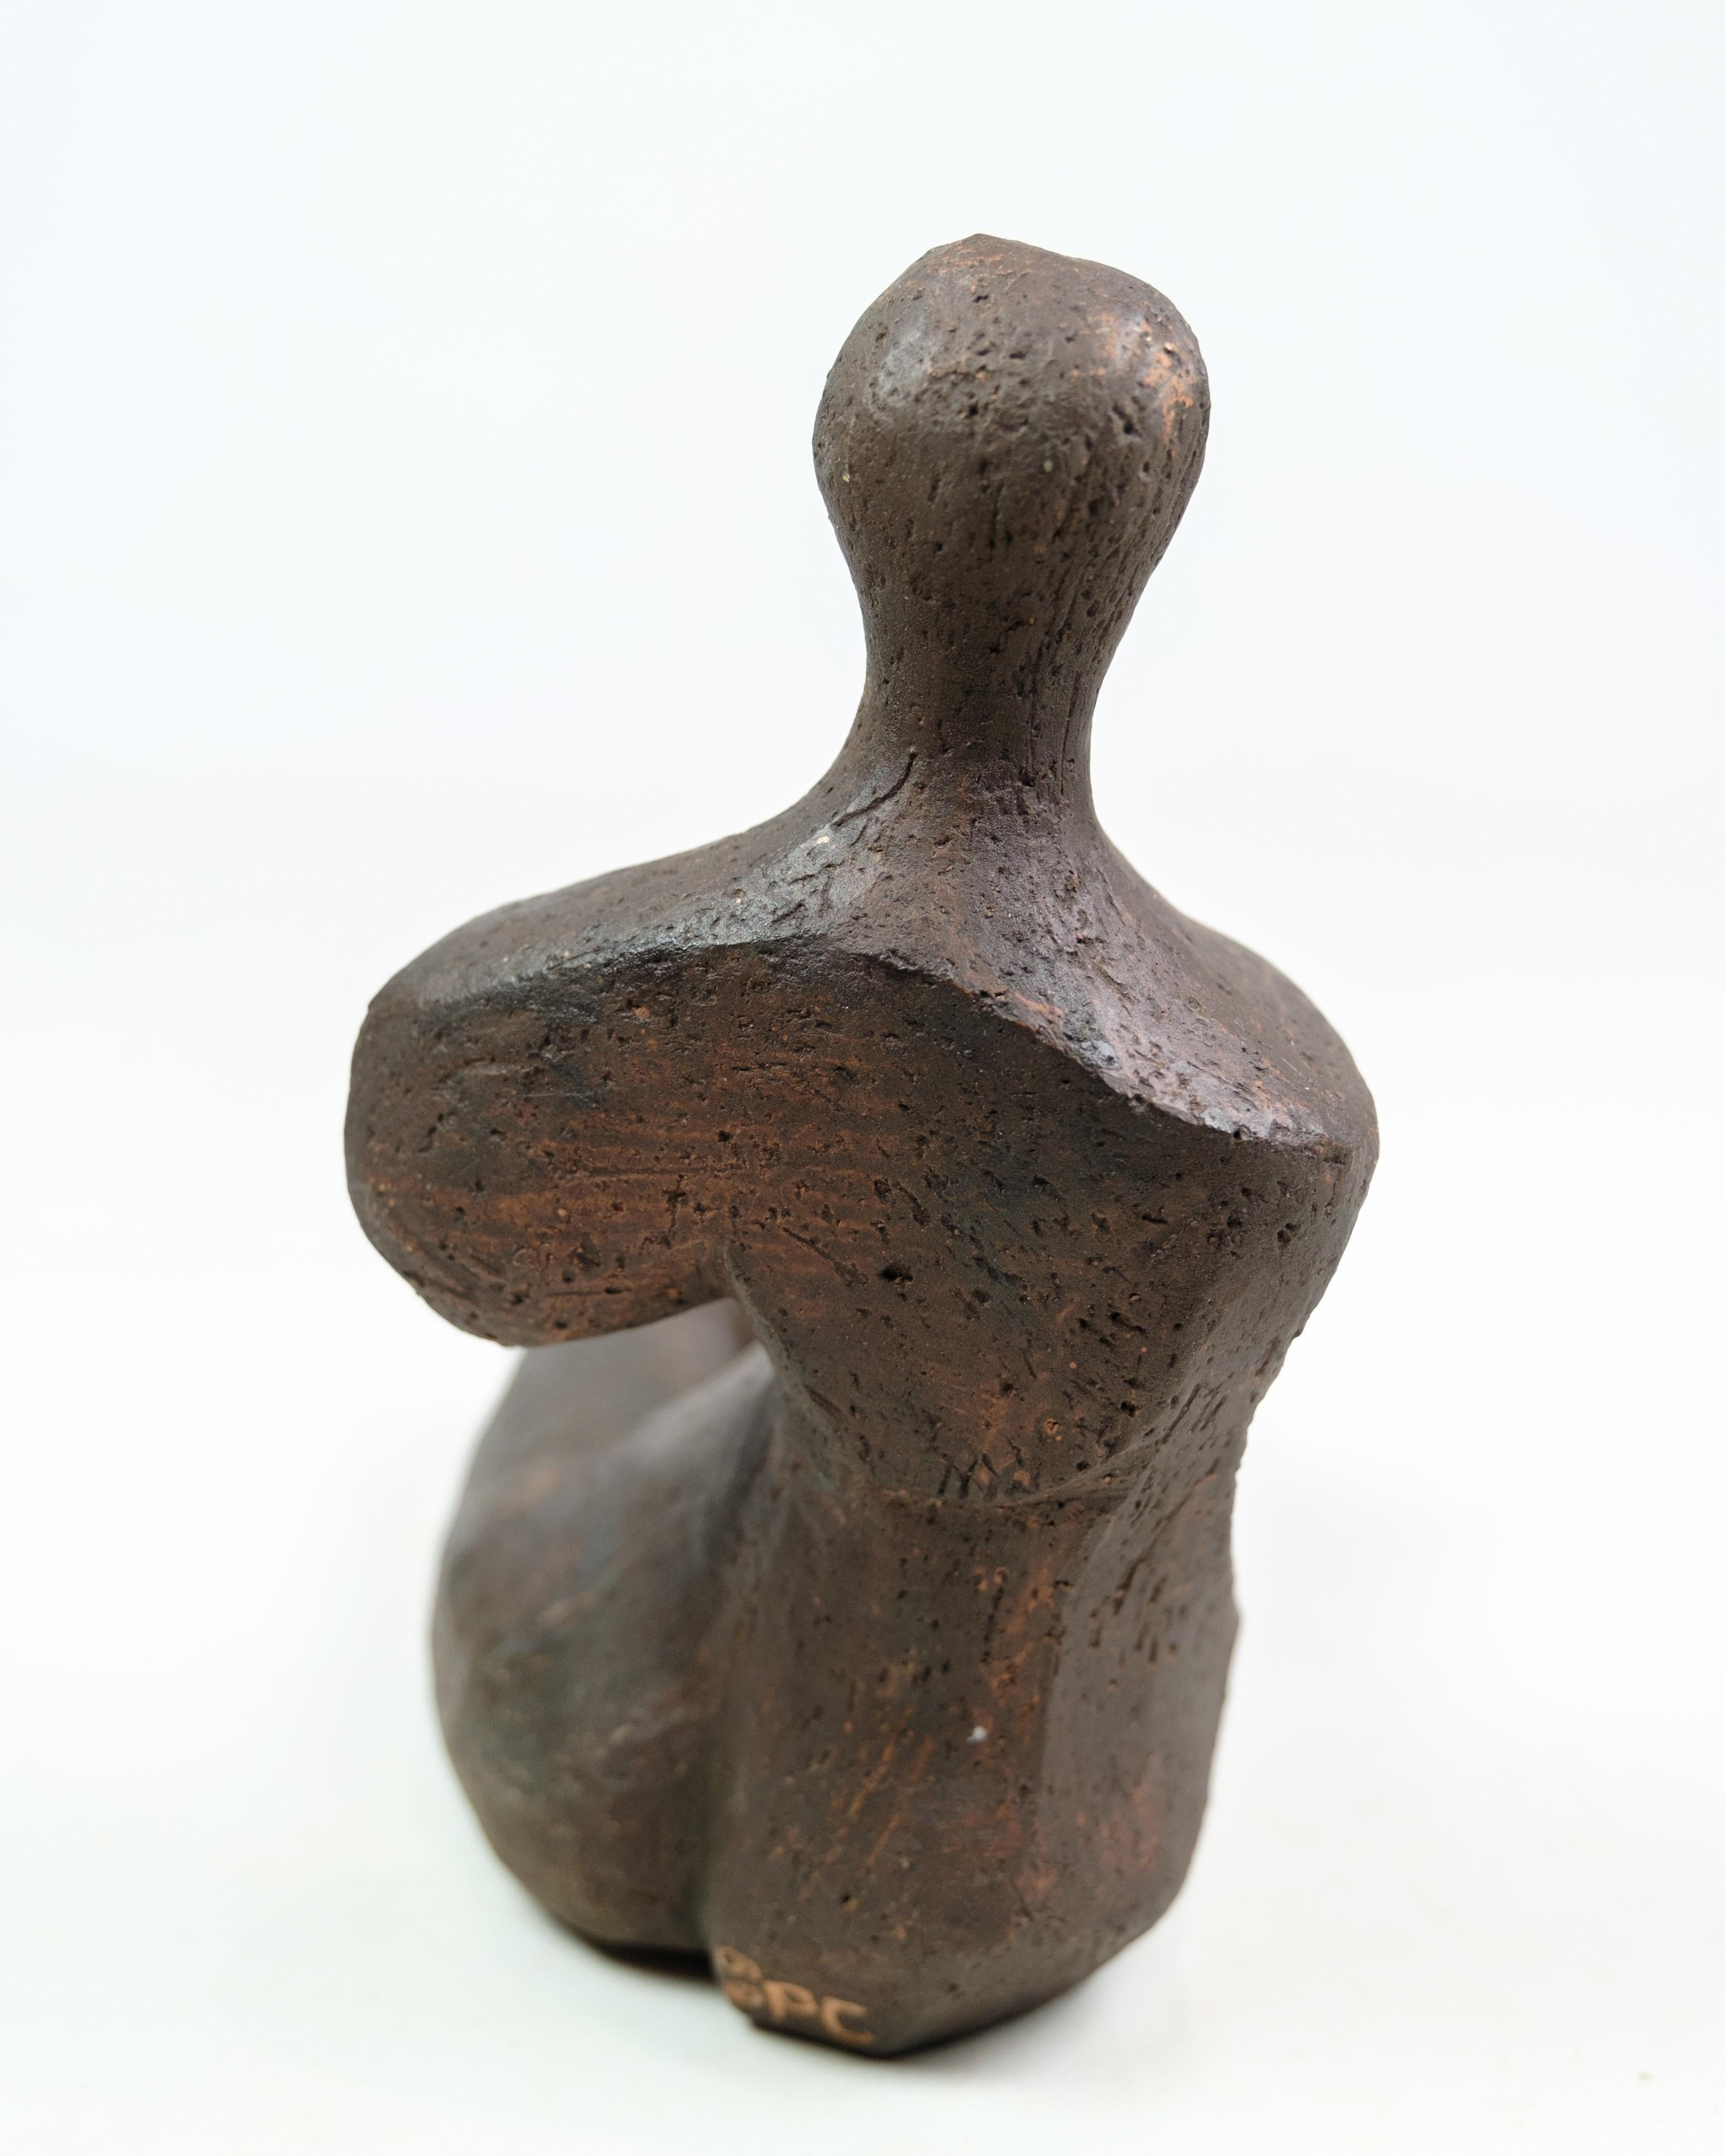 The stoneware sculpture, designed and crafted by Espen Kalmann, showcases a harmonious blend of form and texture. Kalmann's creation exudes a sense of craftsmanship and artistry, evident in the intricate details and skillful execution of the piece.